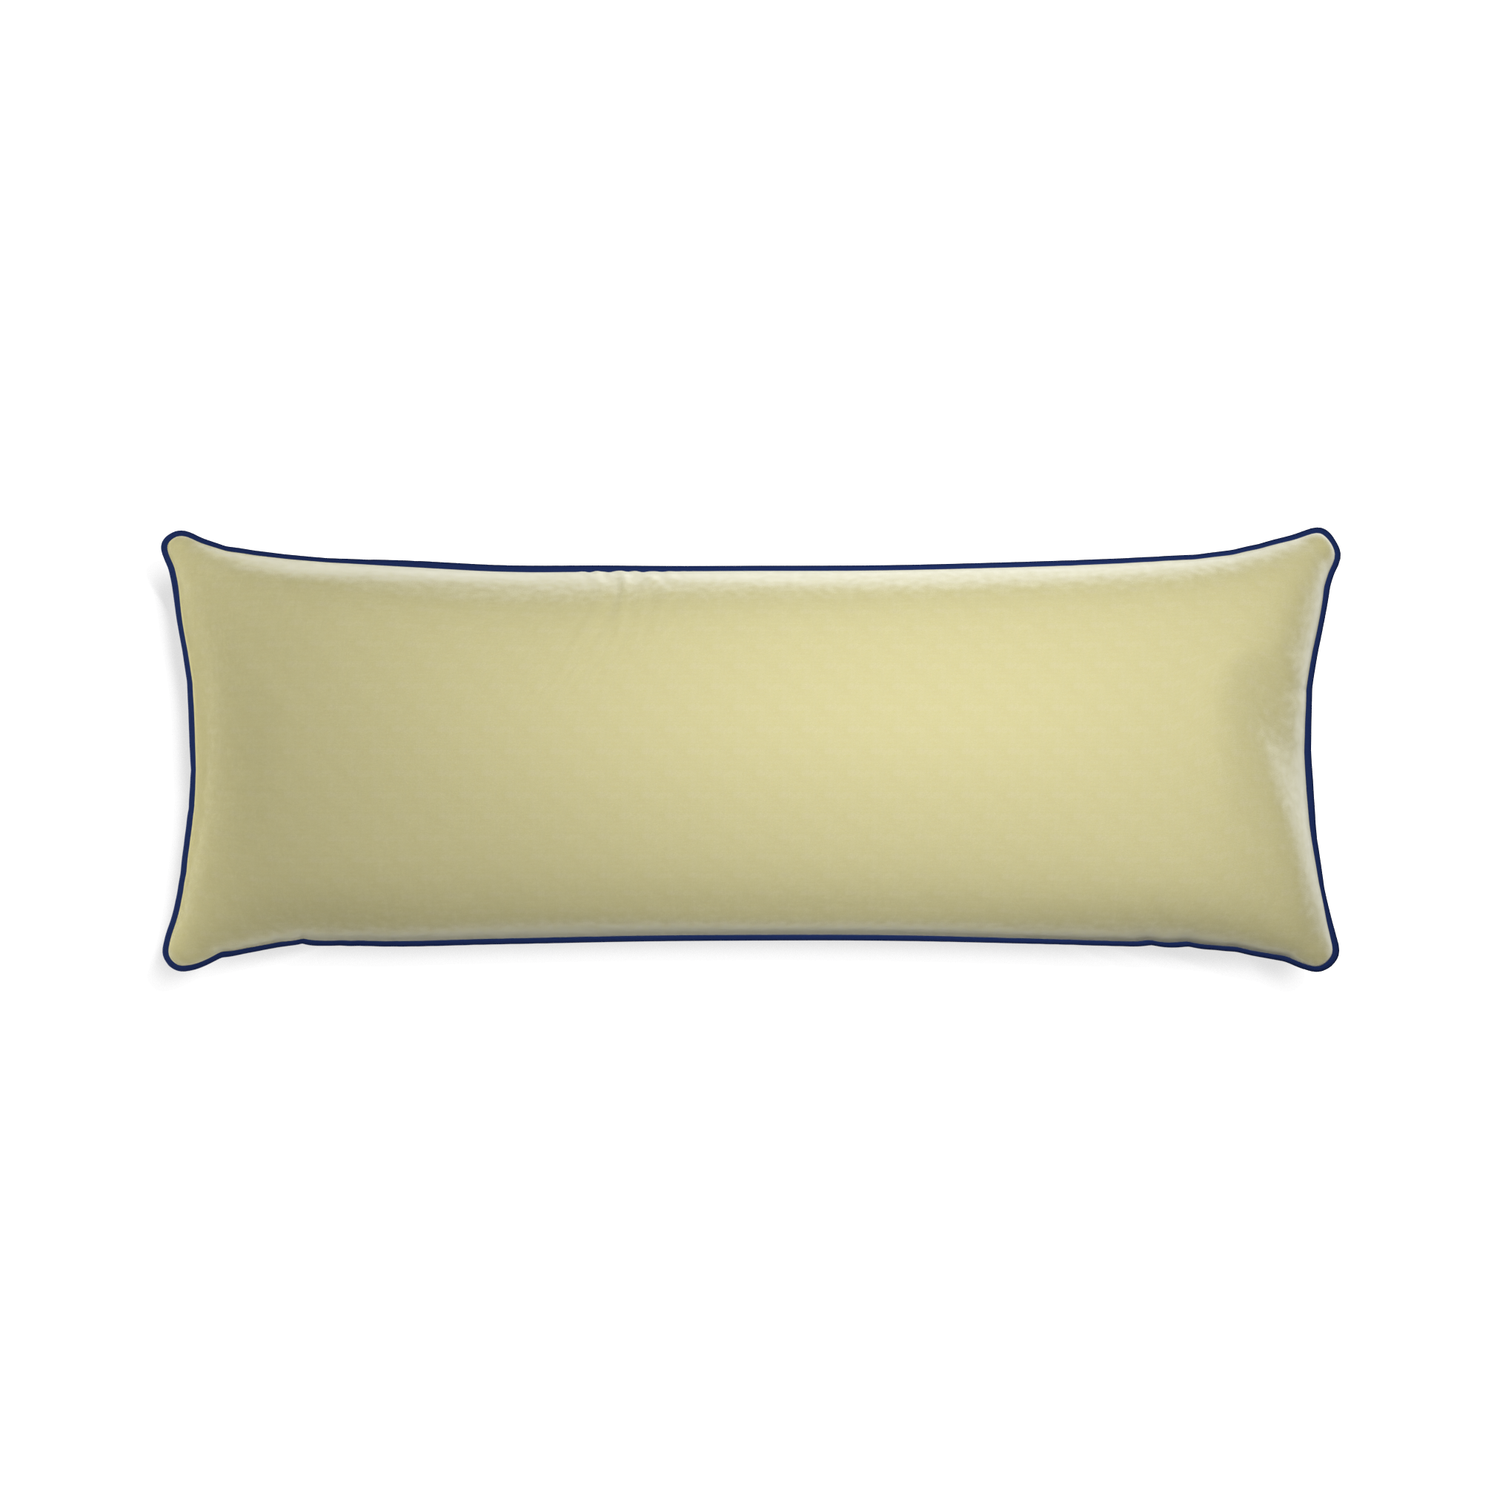 Xl-lumbar pear velvet custom light greenpillow with midnight piping on white background